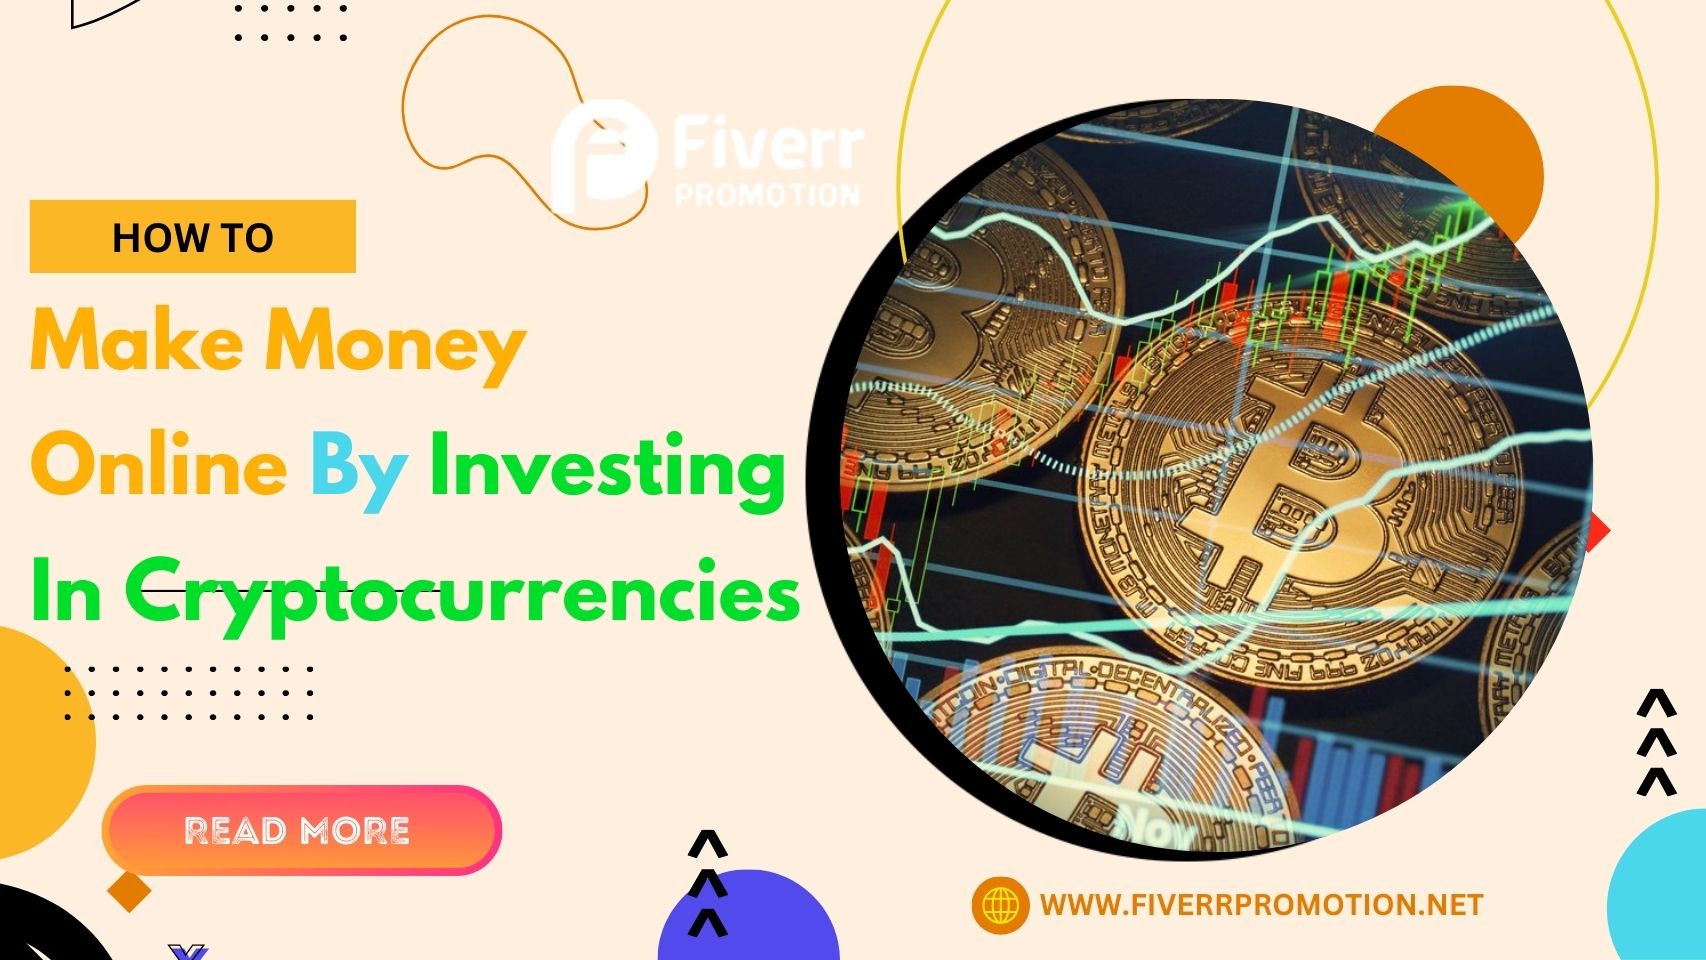 How to Make Money Online by Investing in Cryptocurrencies